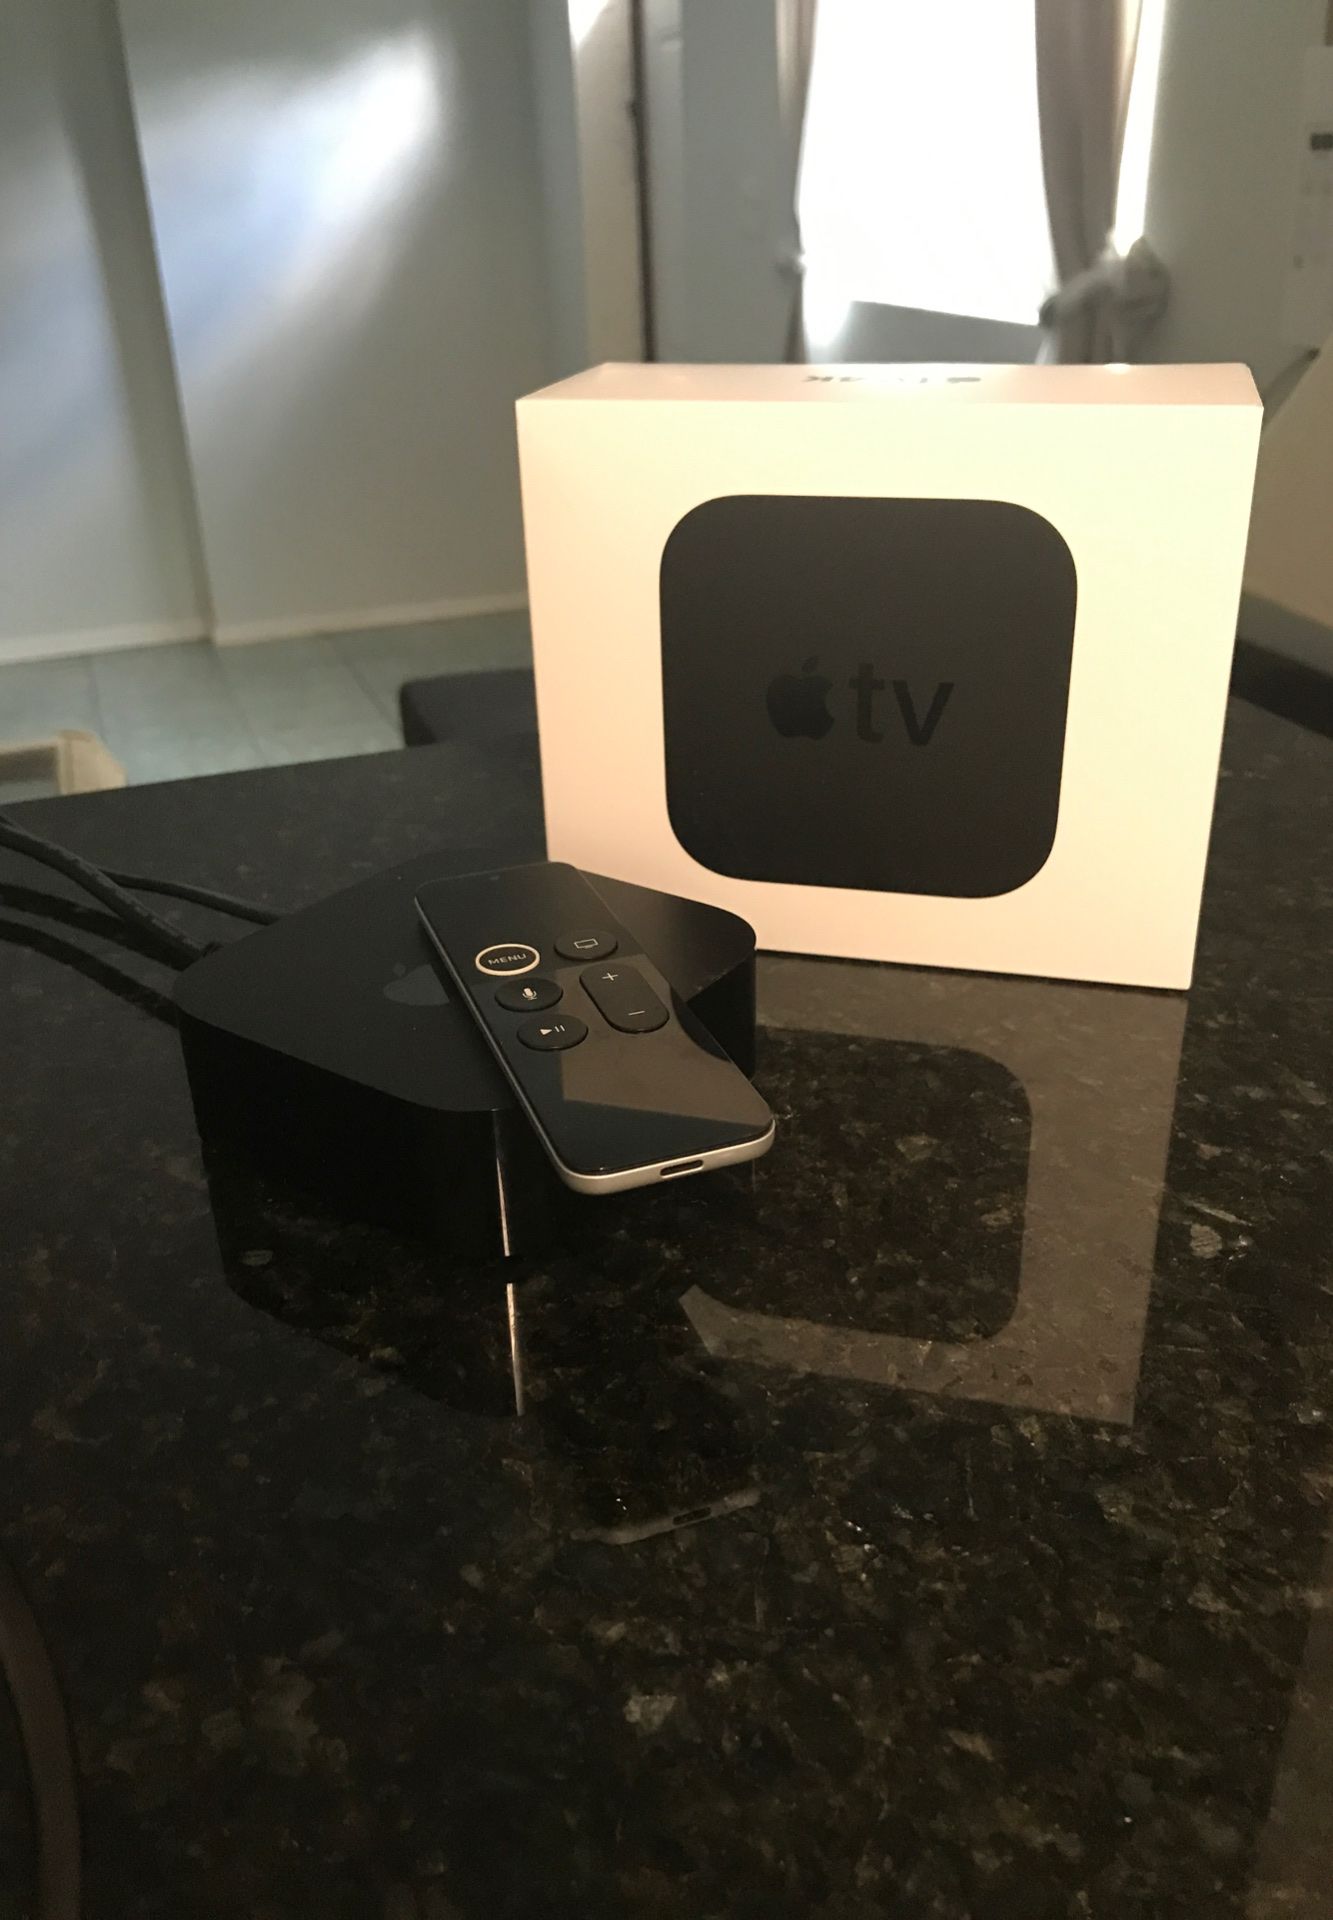 Apple TV used it for a week